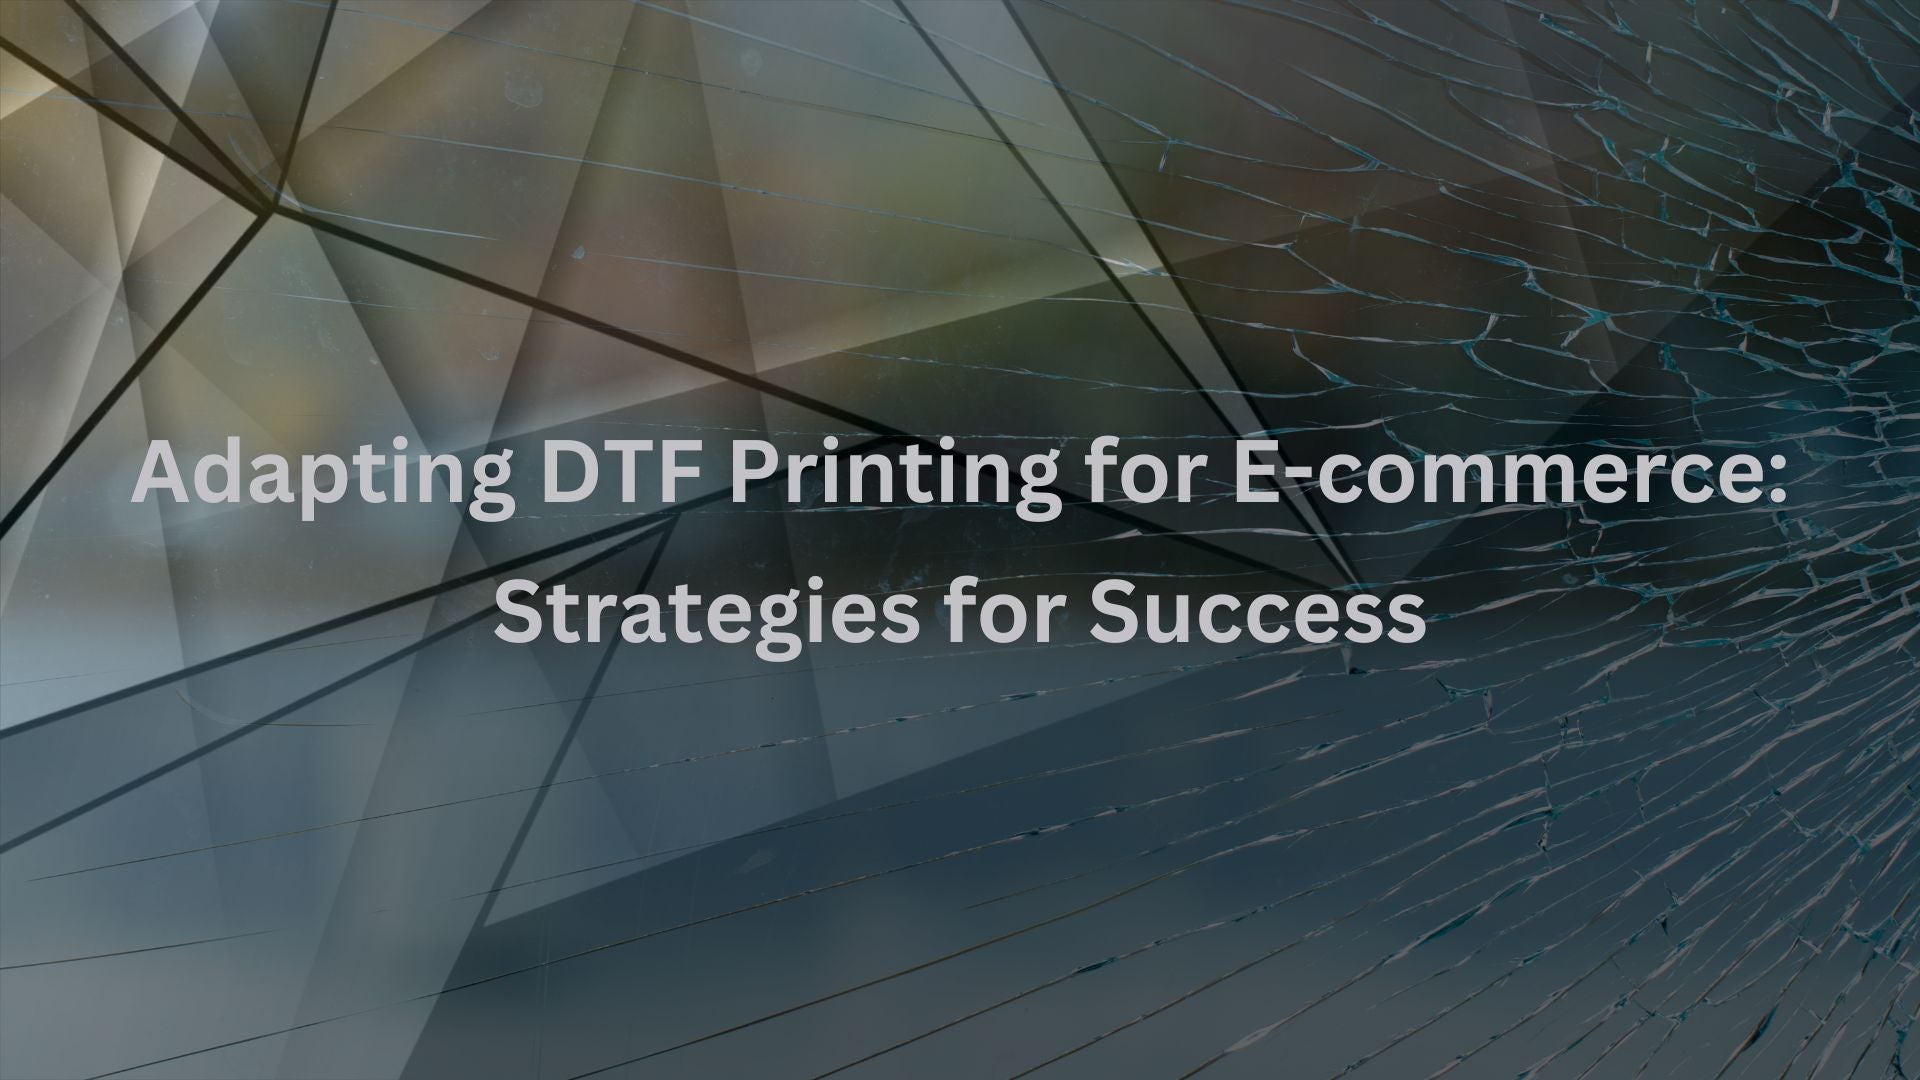 Adapting DTF Printing for E-commerce: Strategies for Success